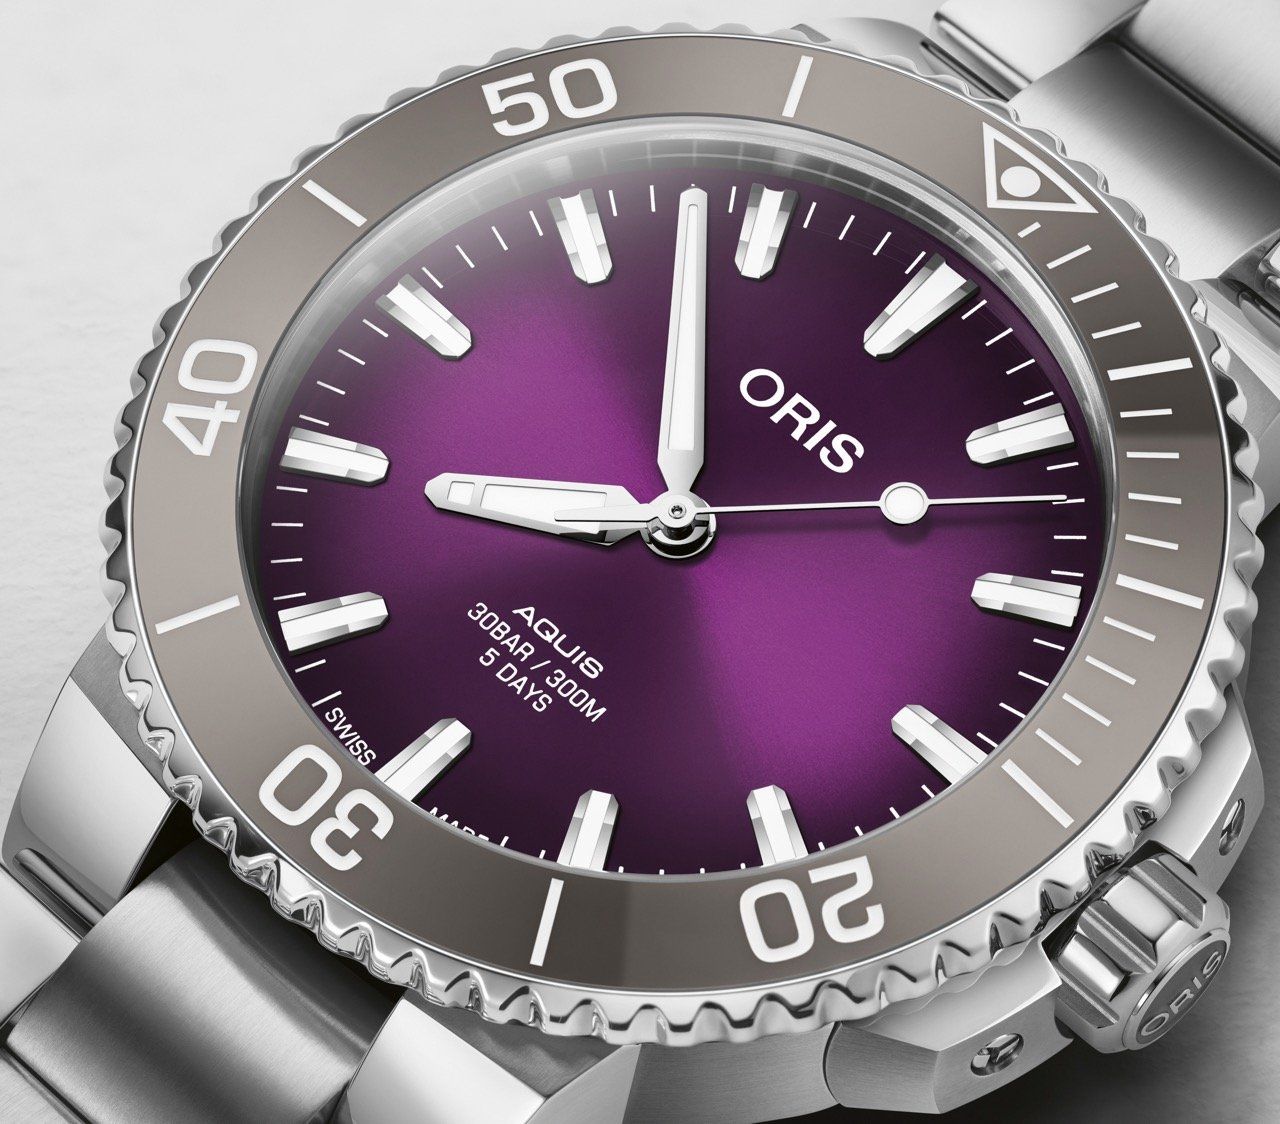 Purple dial and no-date: First ever in the Aquis line-up